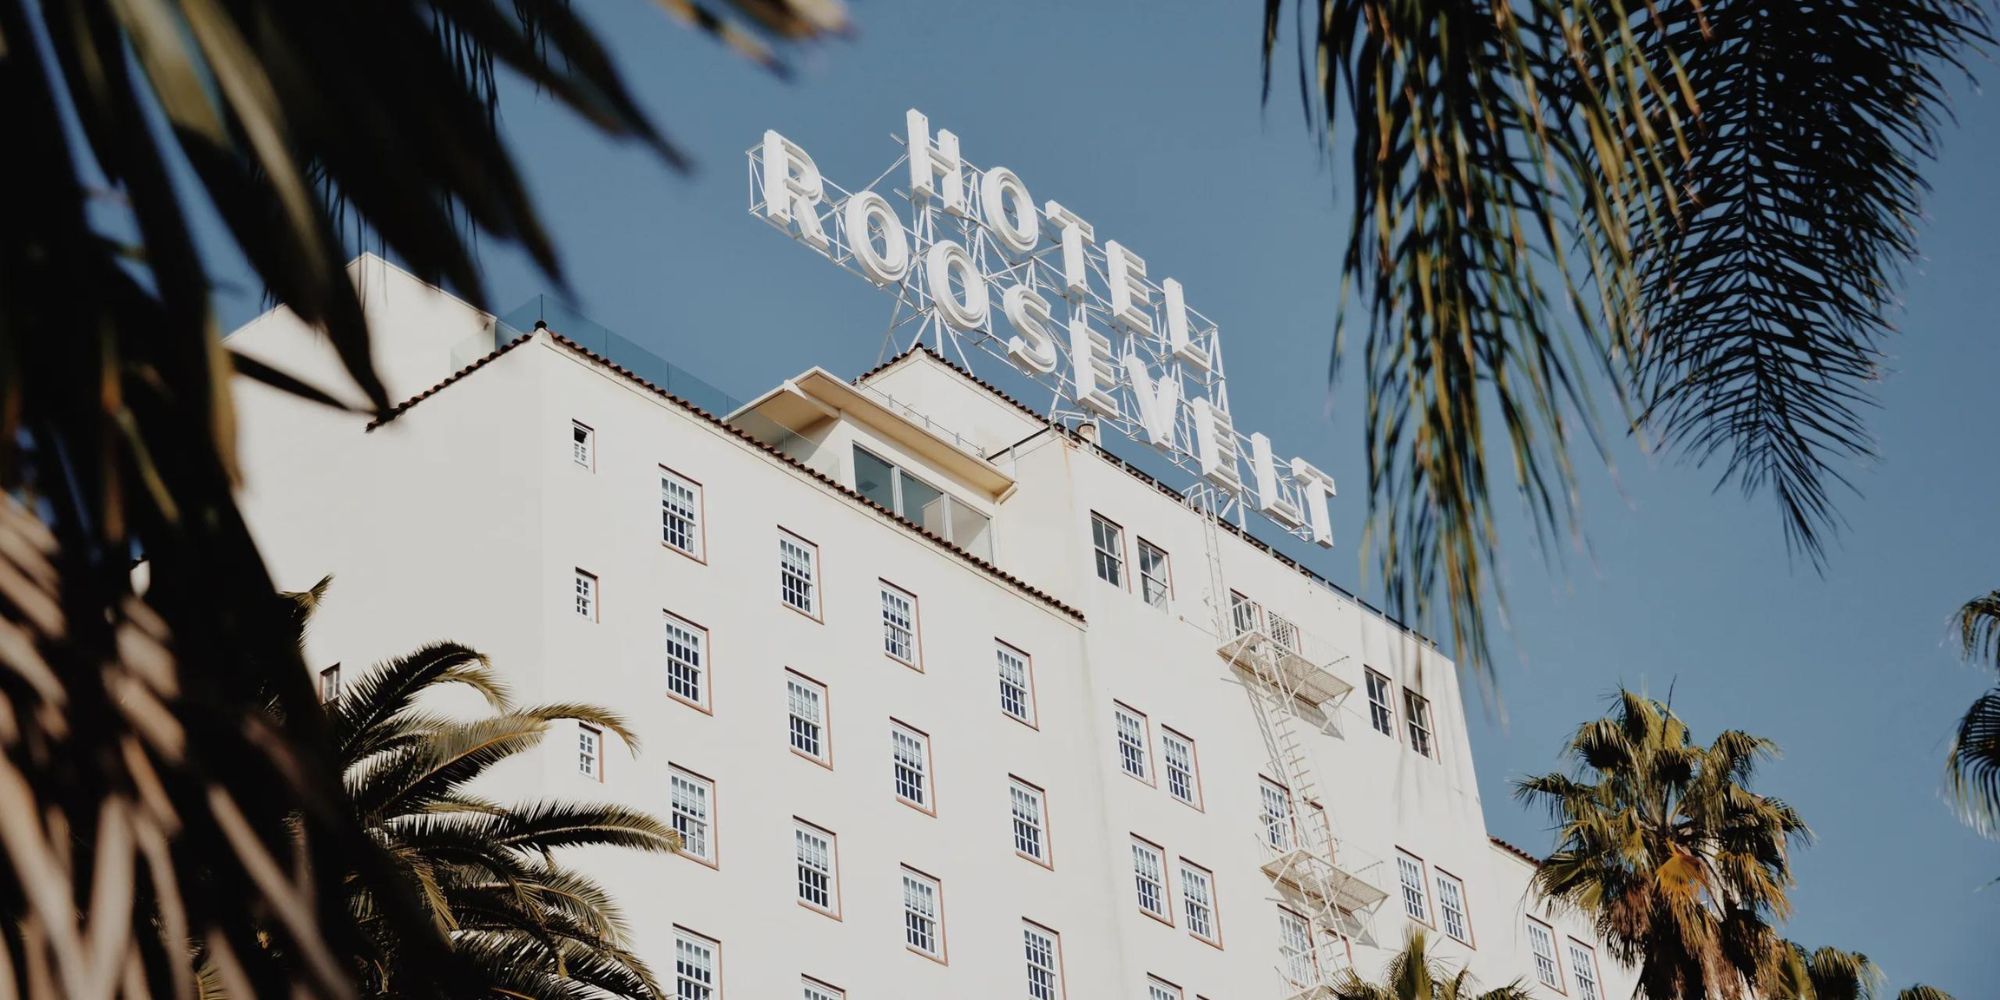 Hollywood Roosevelt Hotel in Los Angeles